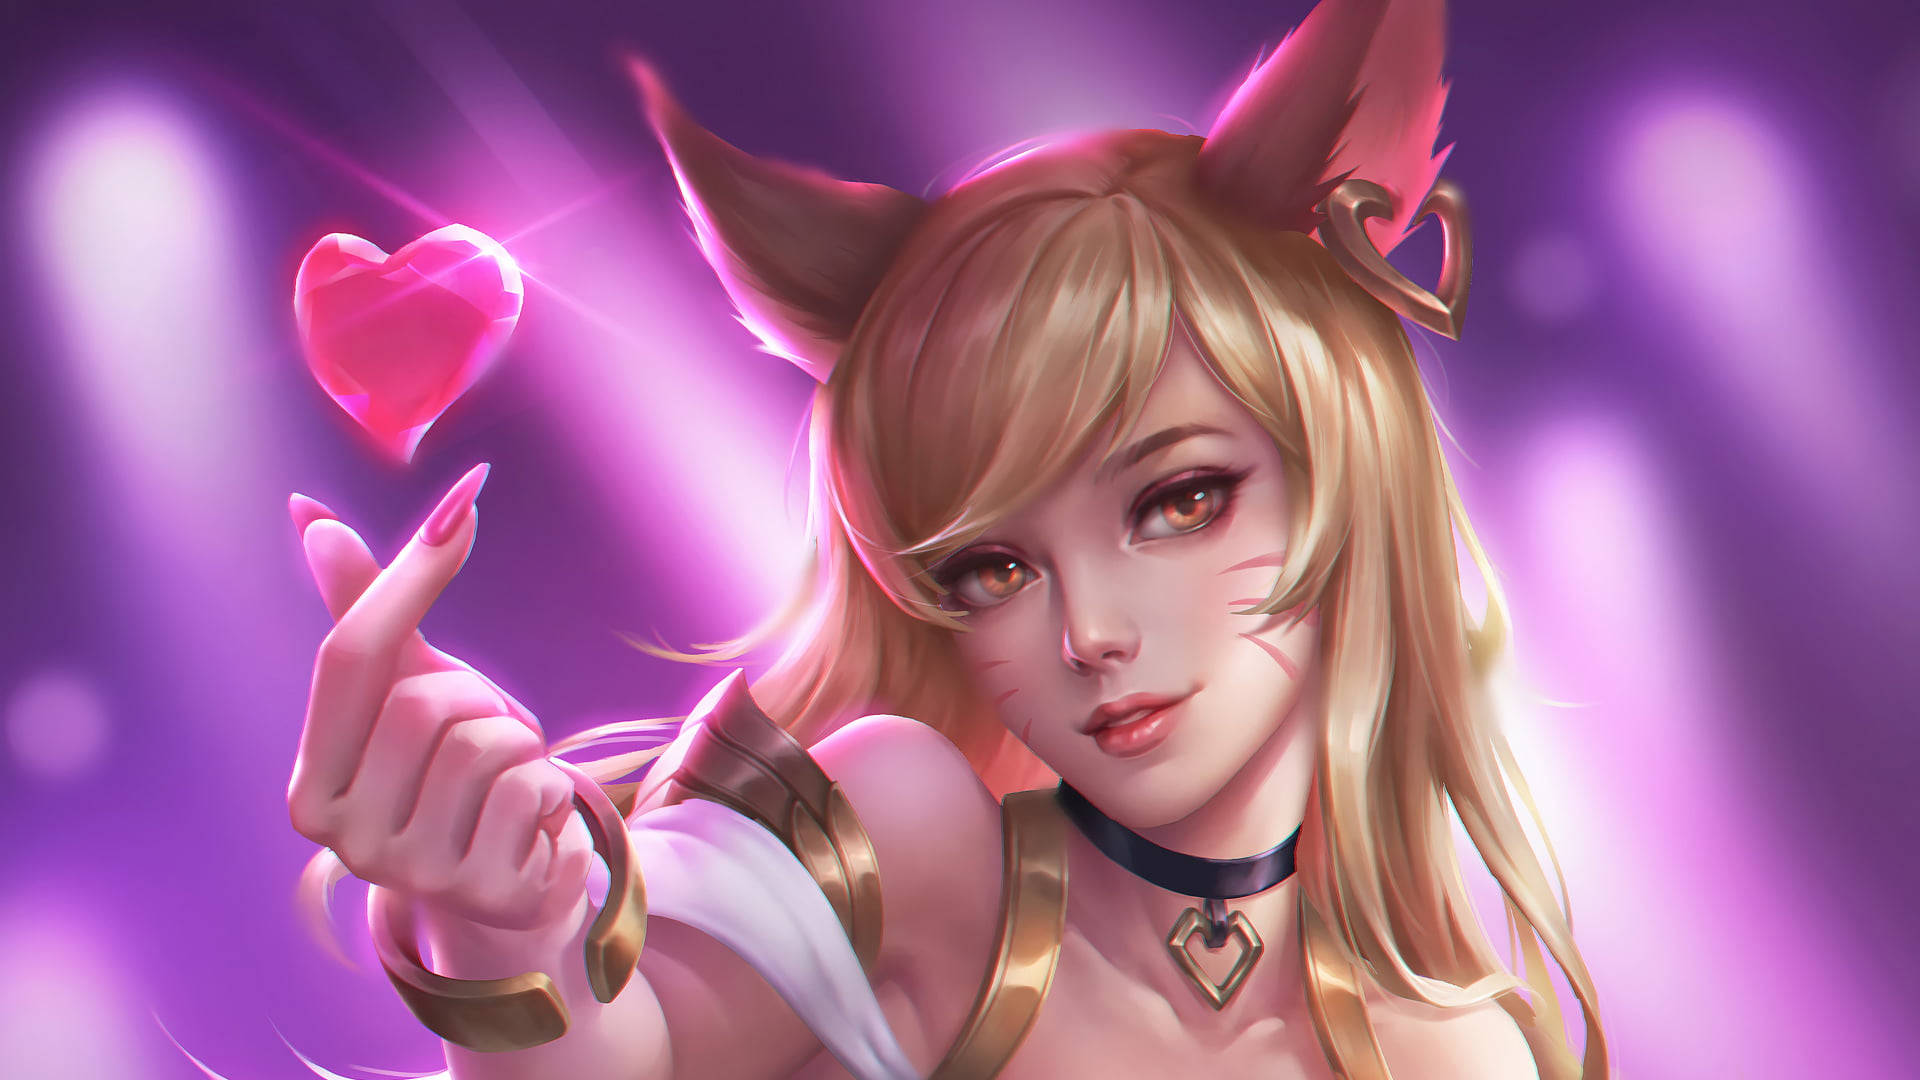 Experiencing Love Through A Hand Heart In League Of Legends